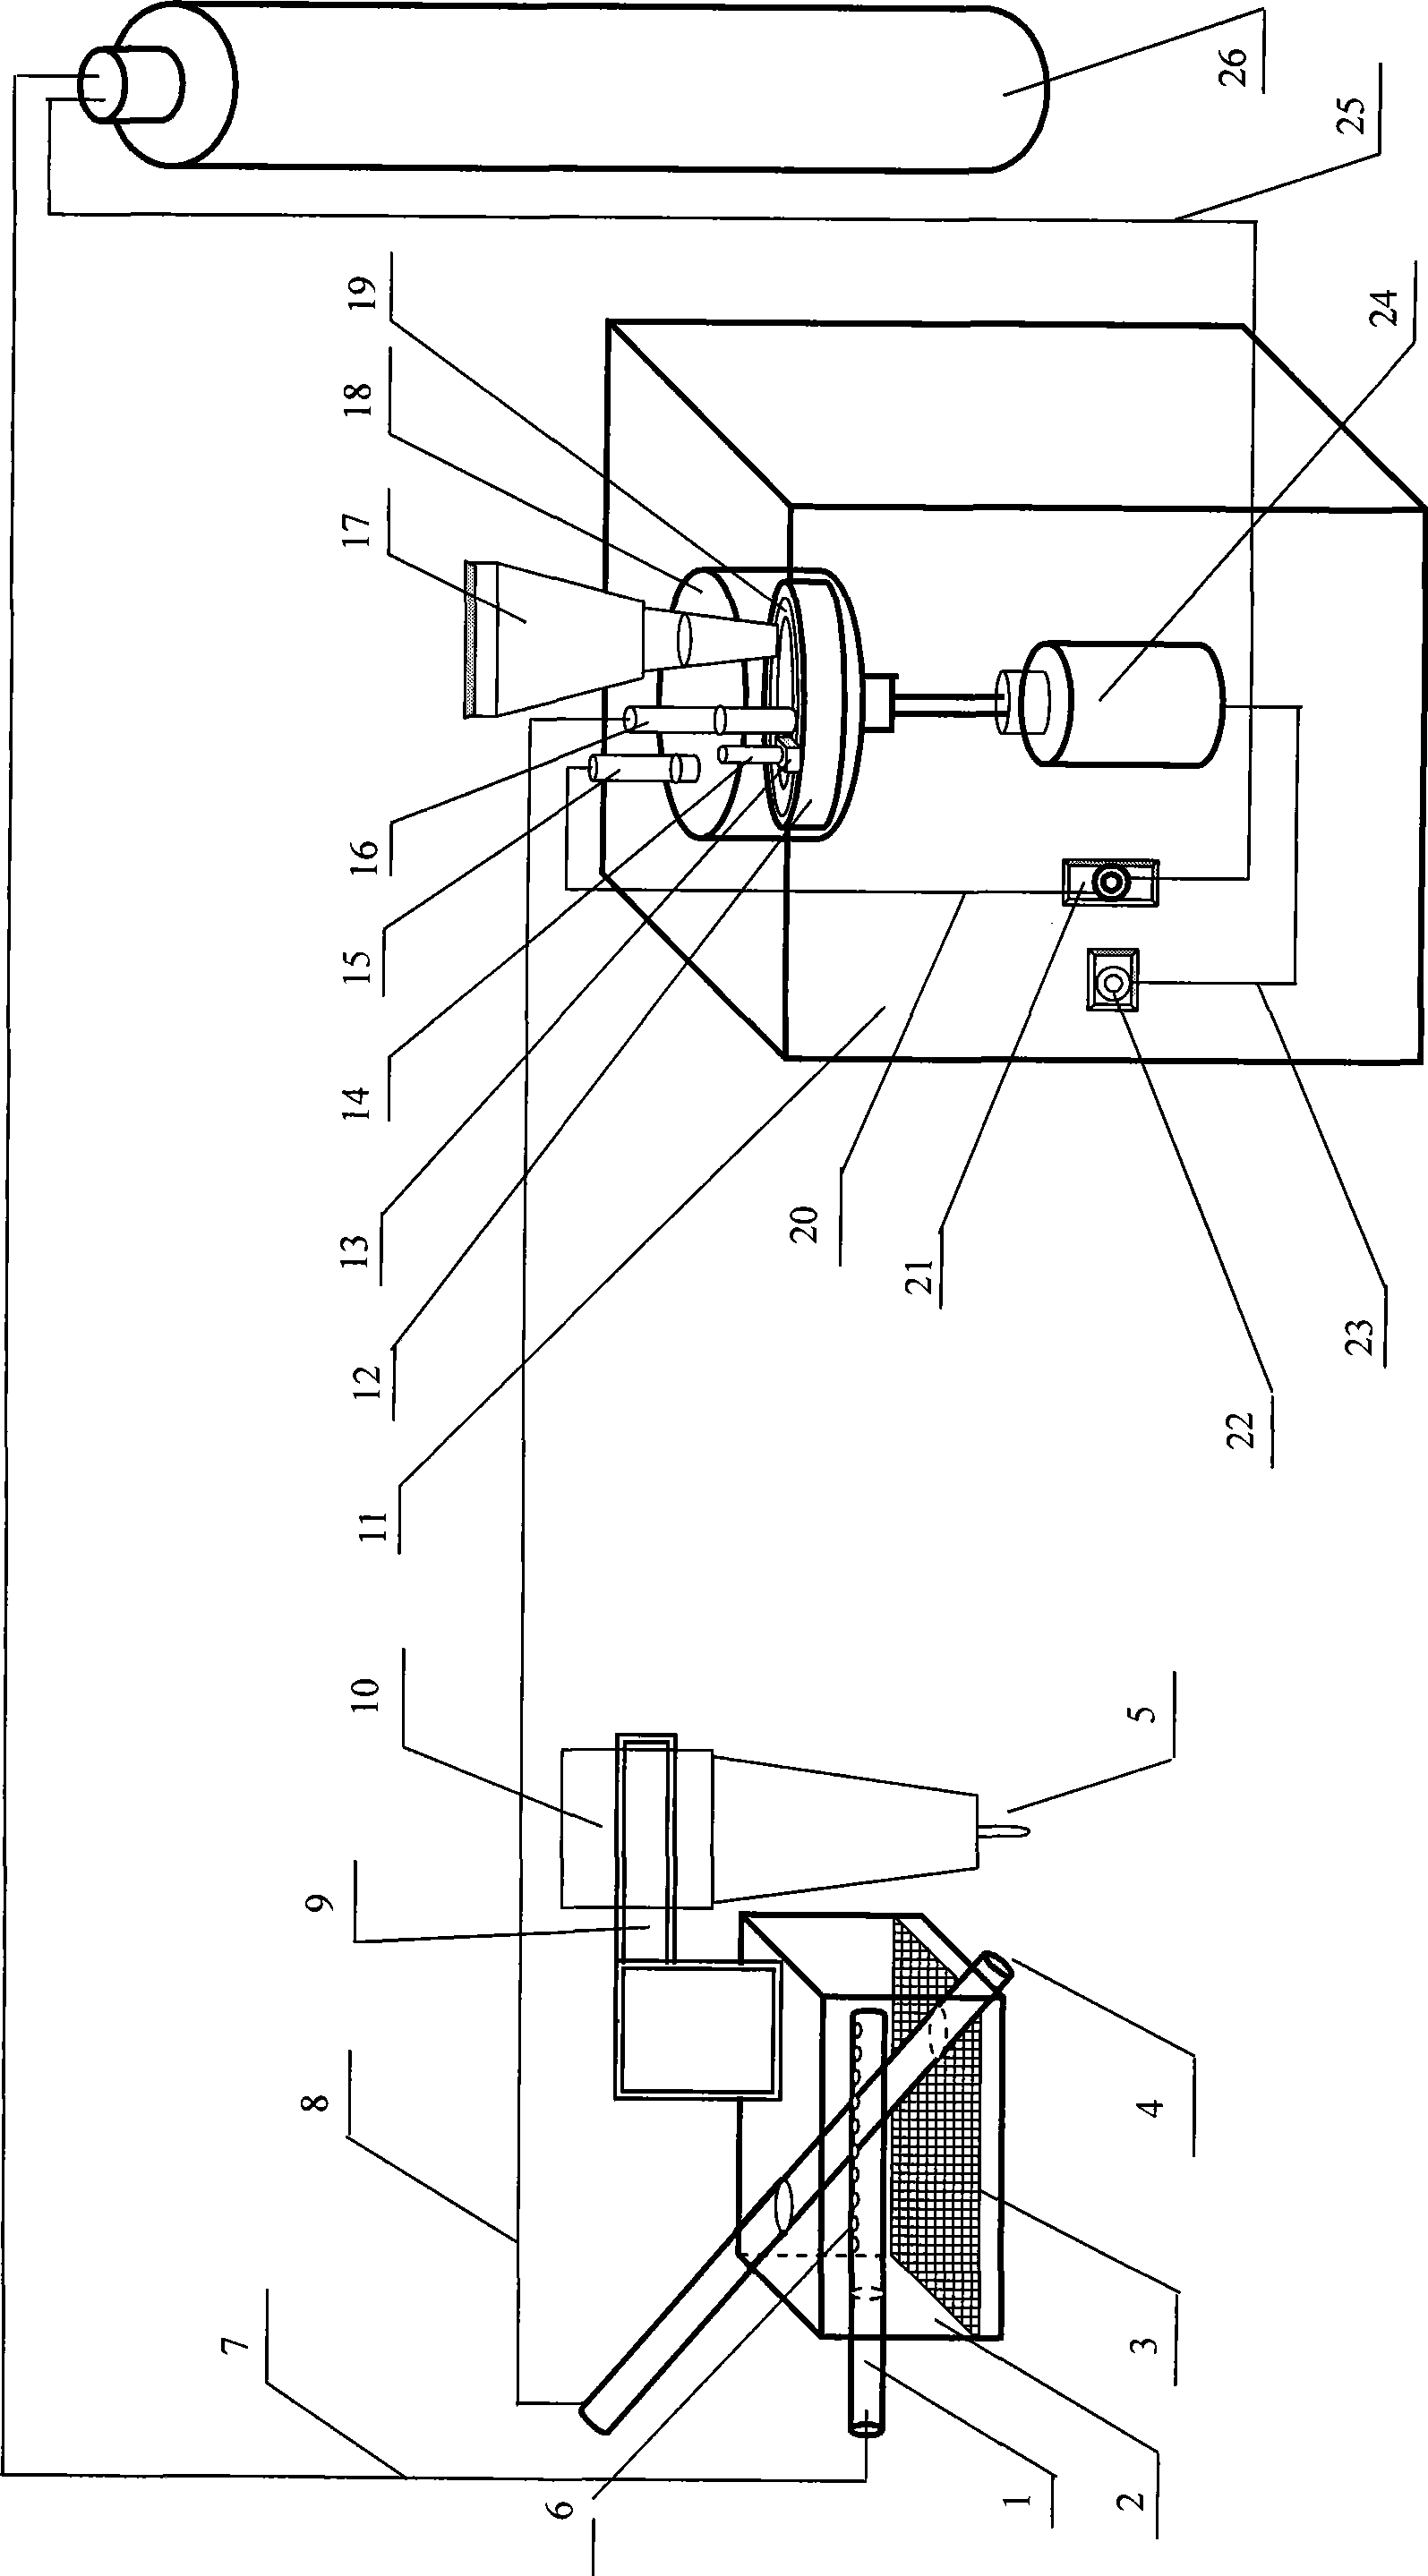 Method for thinning welding-seam organization and increasing welding-seam ductility during welding the titanium alloy, powder filling device